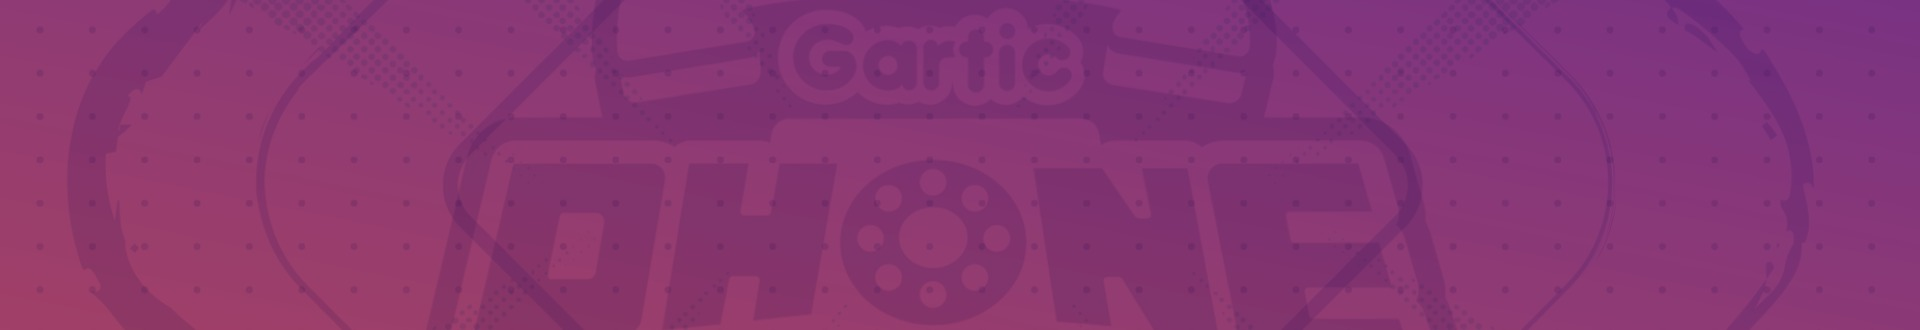 Gartic Phone, what it is and how to play this fun proposal 